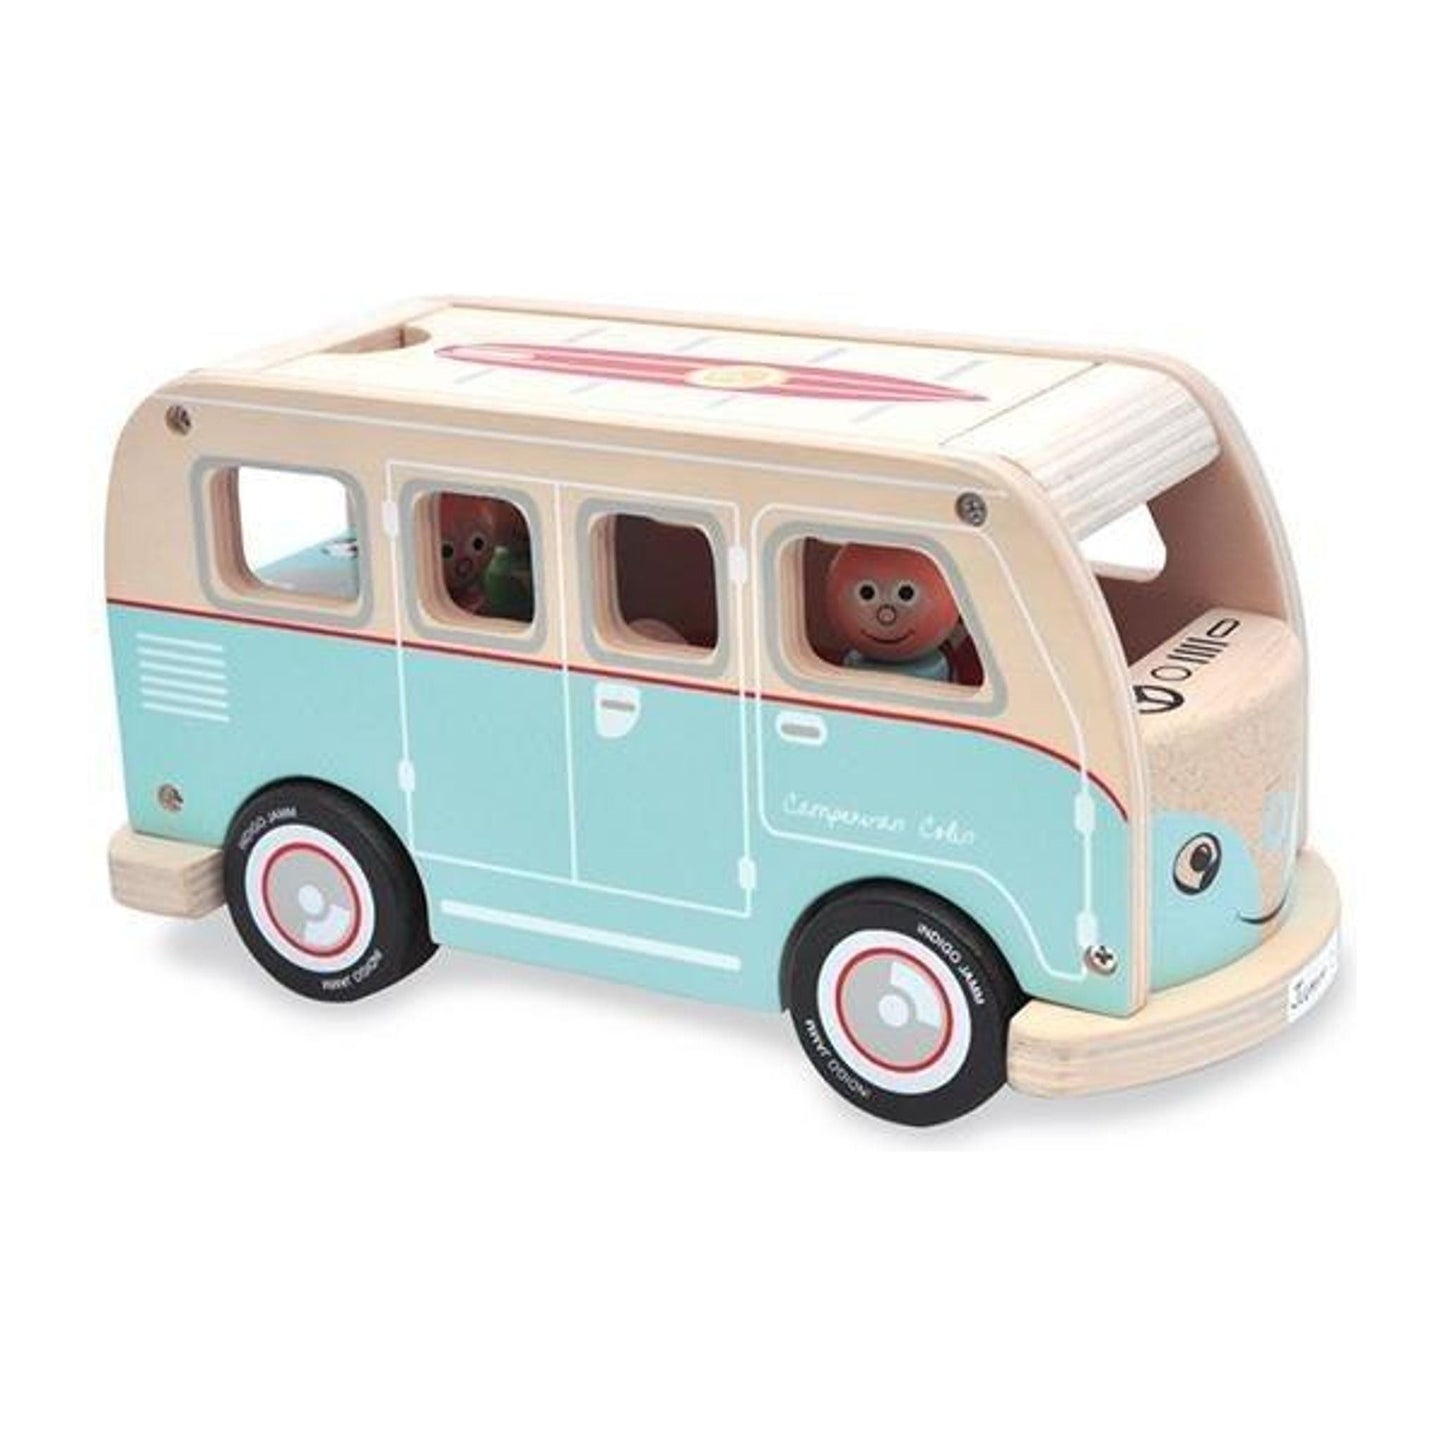 Colin's Campervan - Toybox Tales